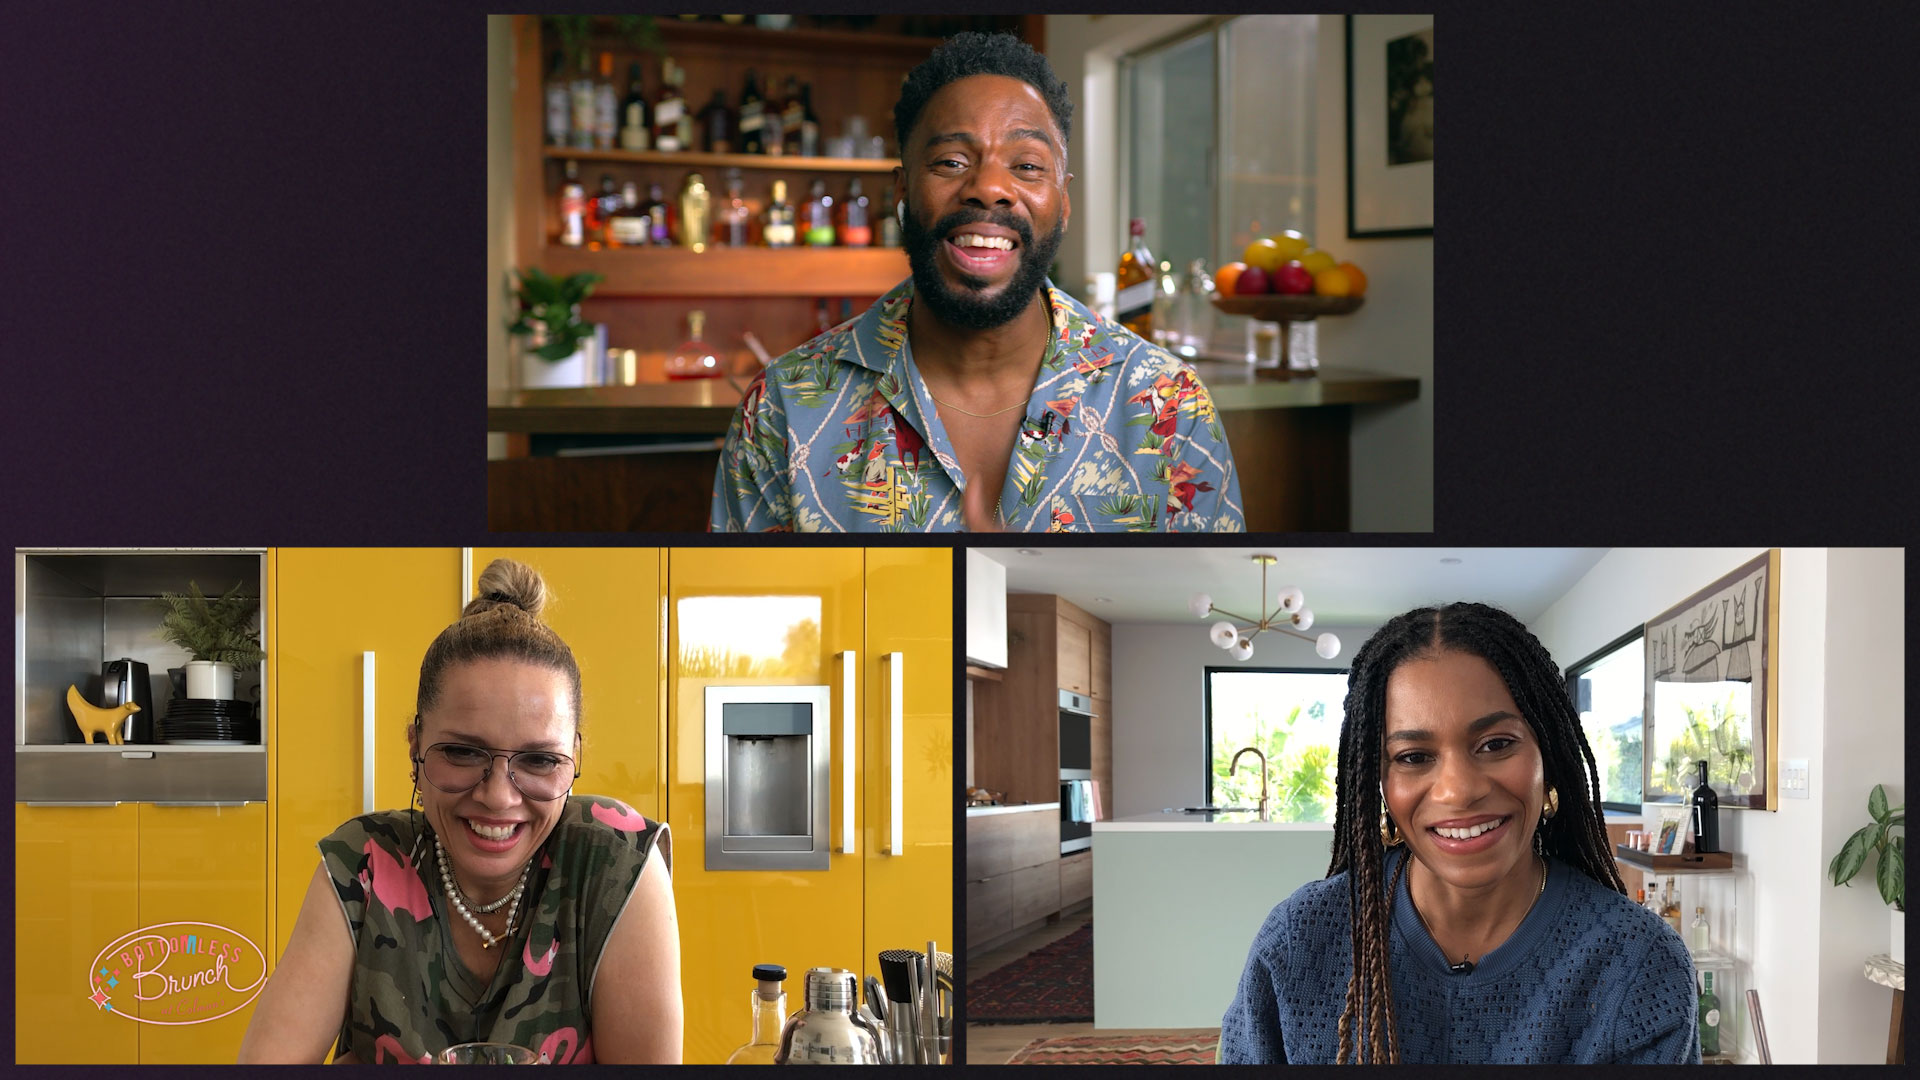 Bottomless Brunch at Colman's Season 3 Episode 2 - International Women's Day With Victoria Mahoney and Kelly McCreary